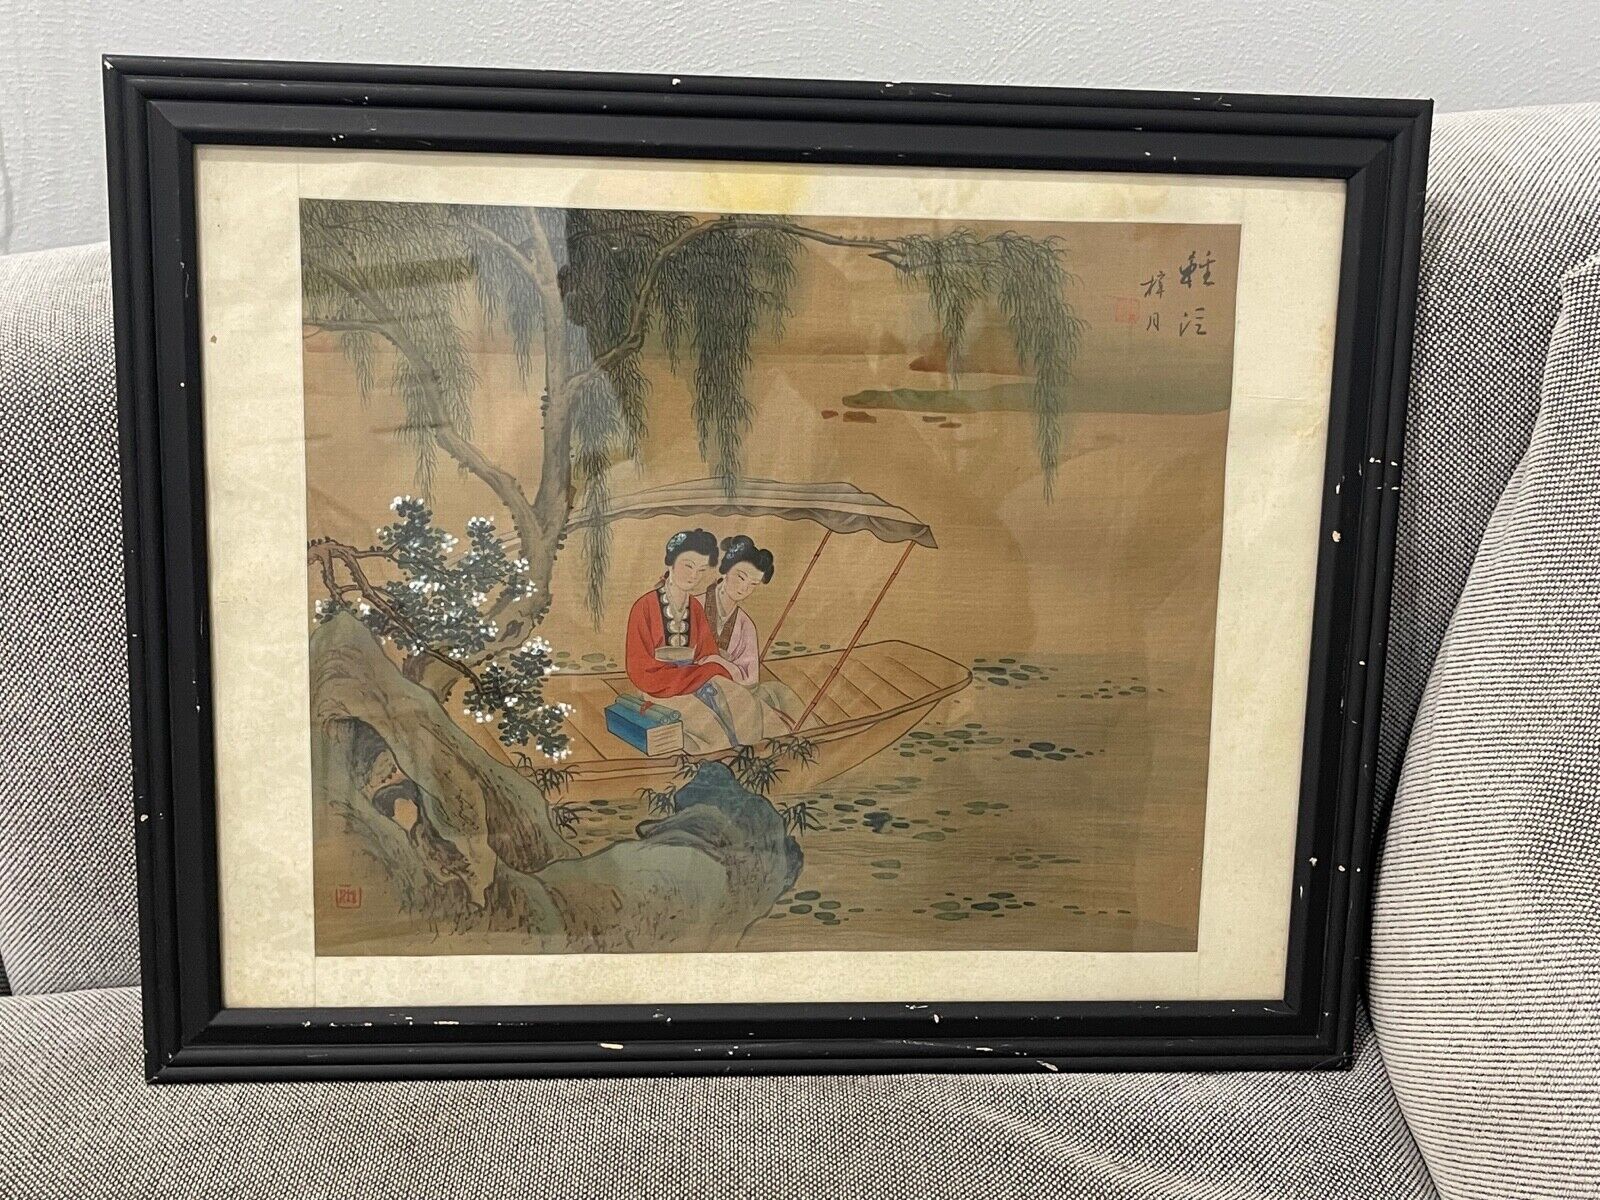 Chinese Unknown Age Signed Painting on Silk or Fabric Two Women on Boat